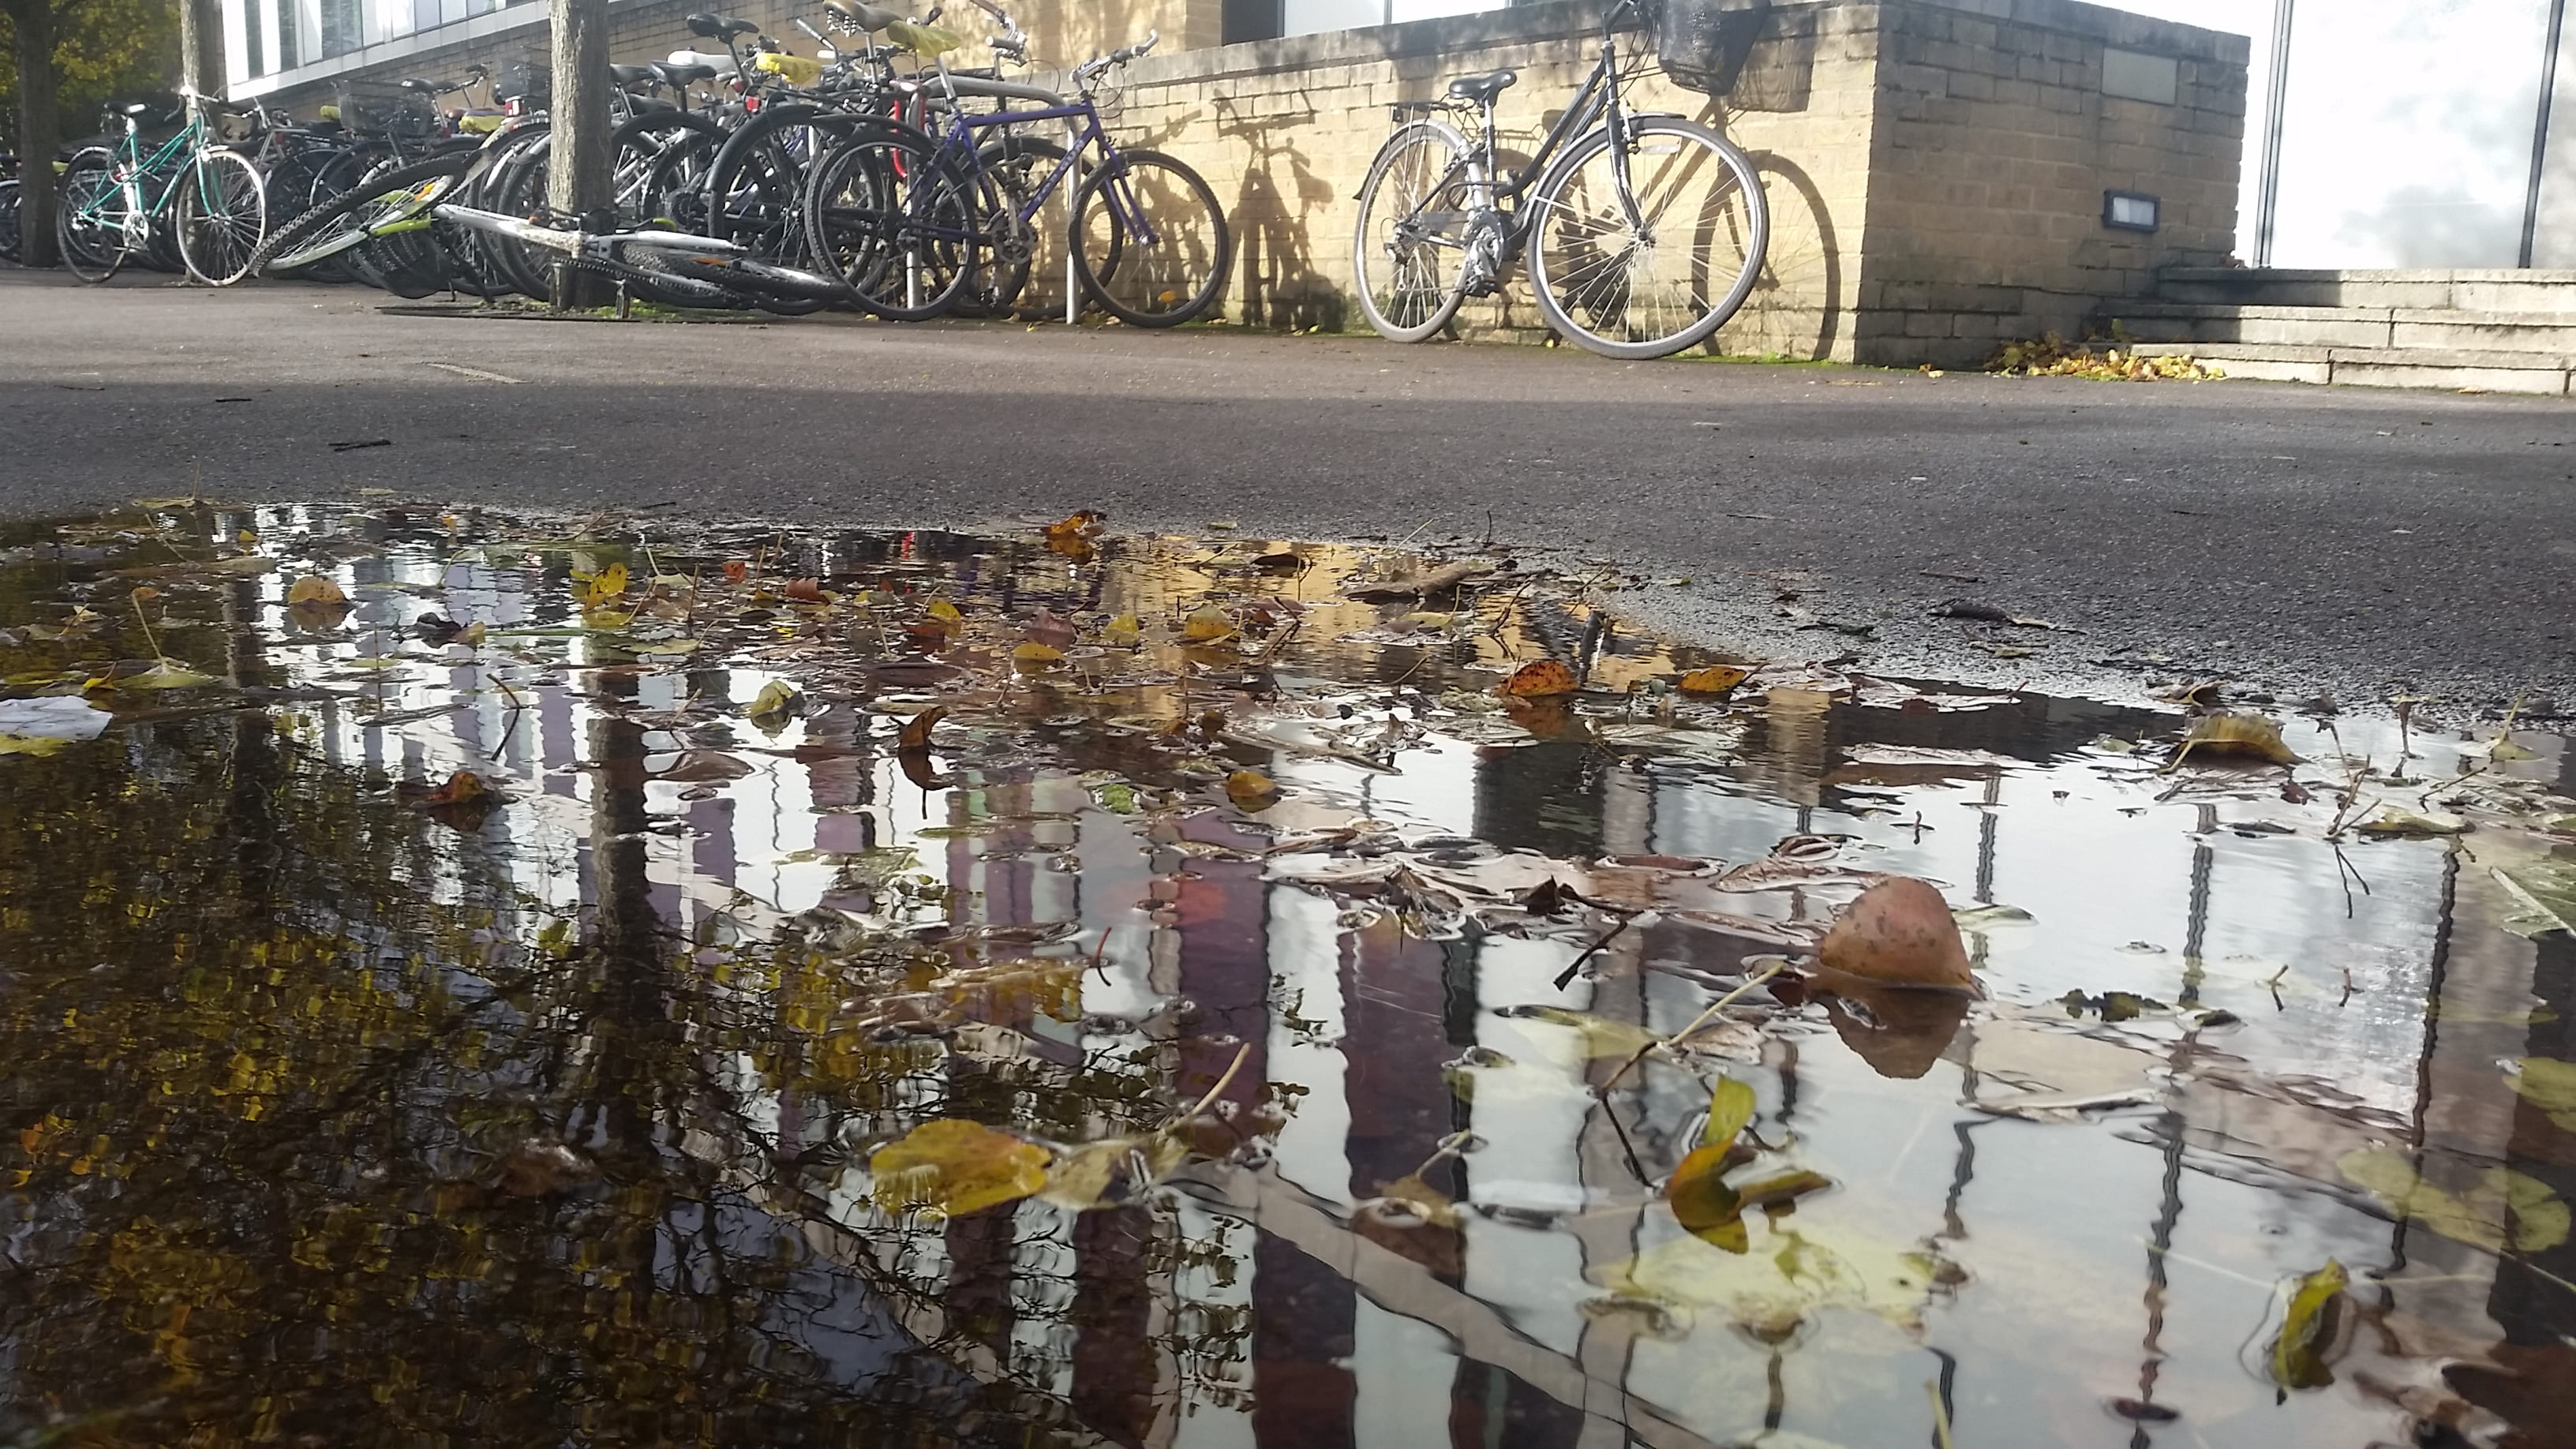 Parked bicycles beside a puddle near the Social Sciences Library, University of Oxford